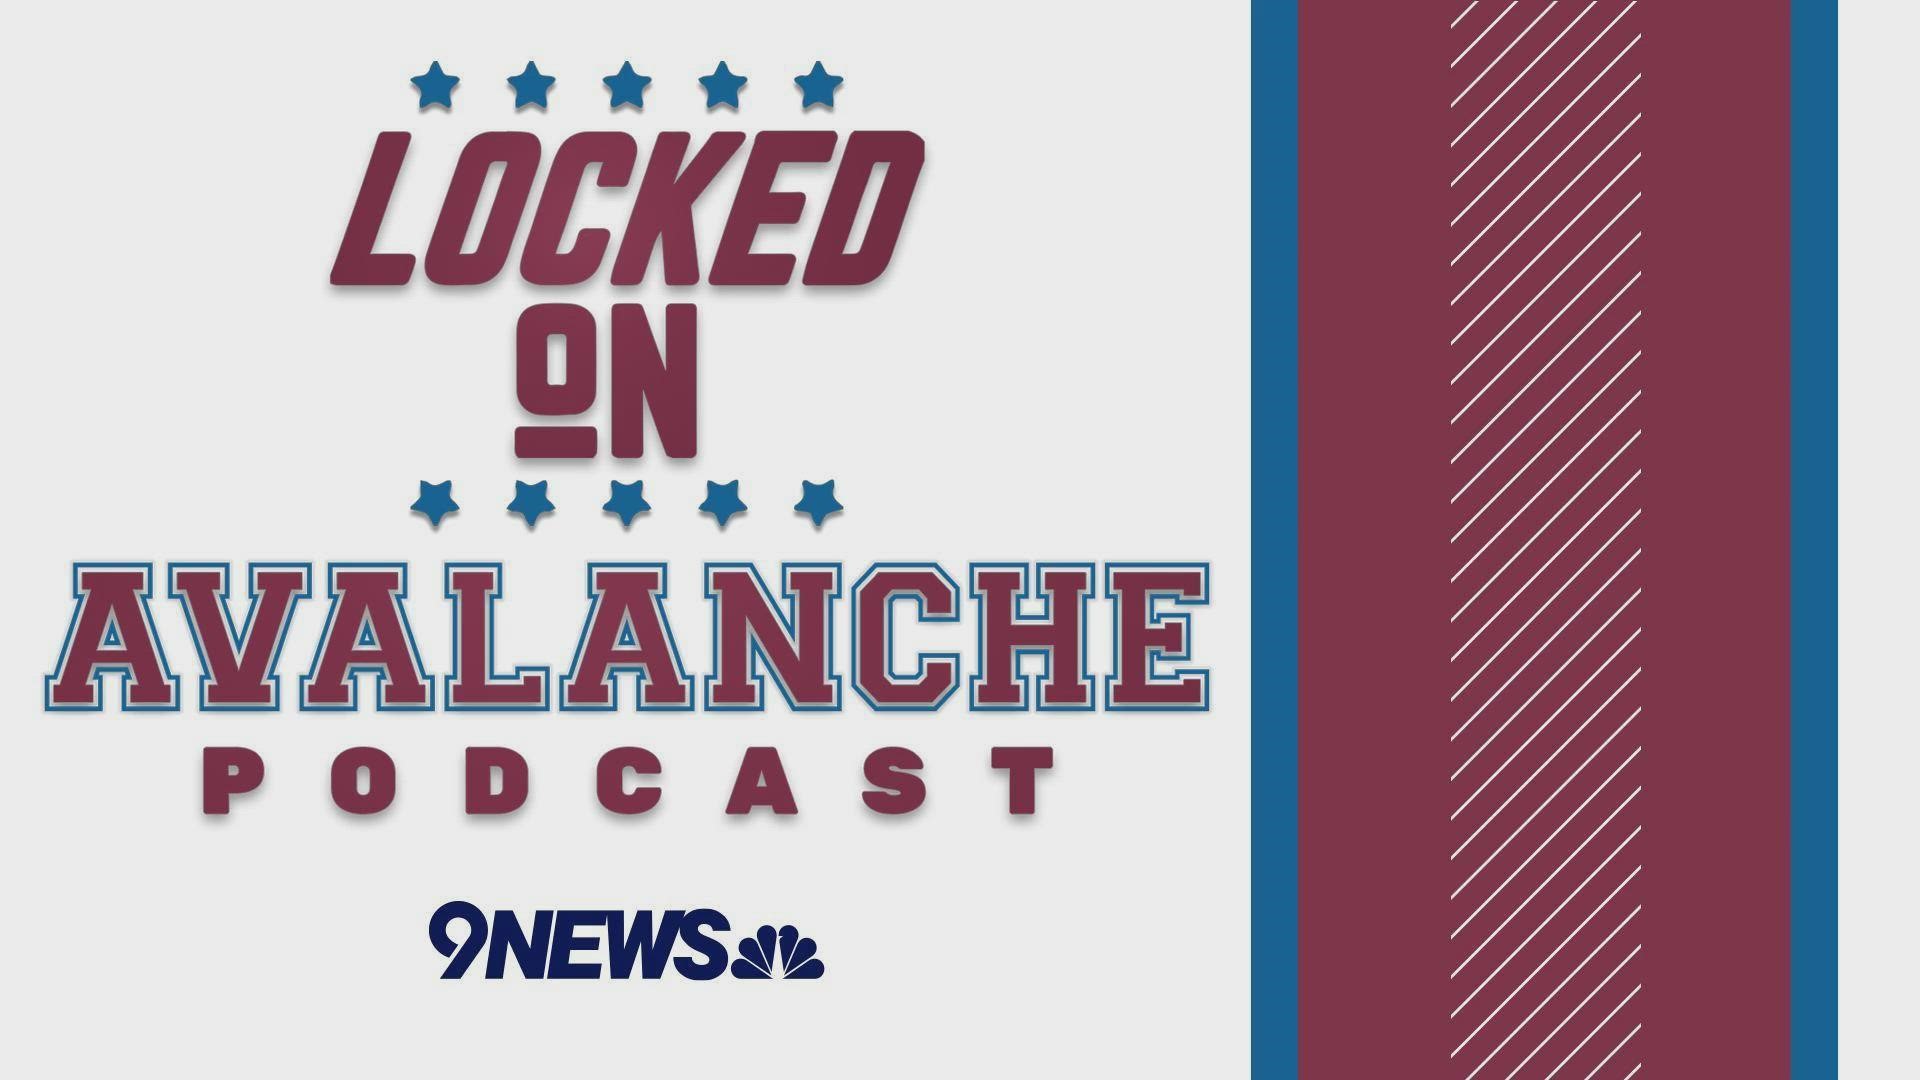 Locked On Avalanche host Chris Micieli and 9NEWS’ Chris Bianchi look back on the Avs’ crushing end to the season, and what it might mean moving forward.